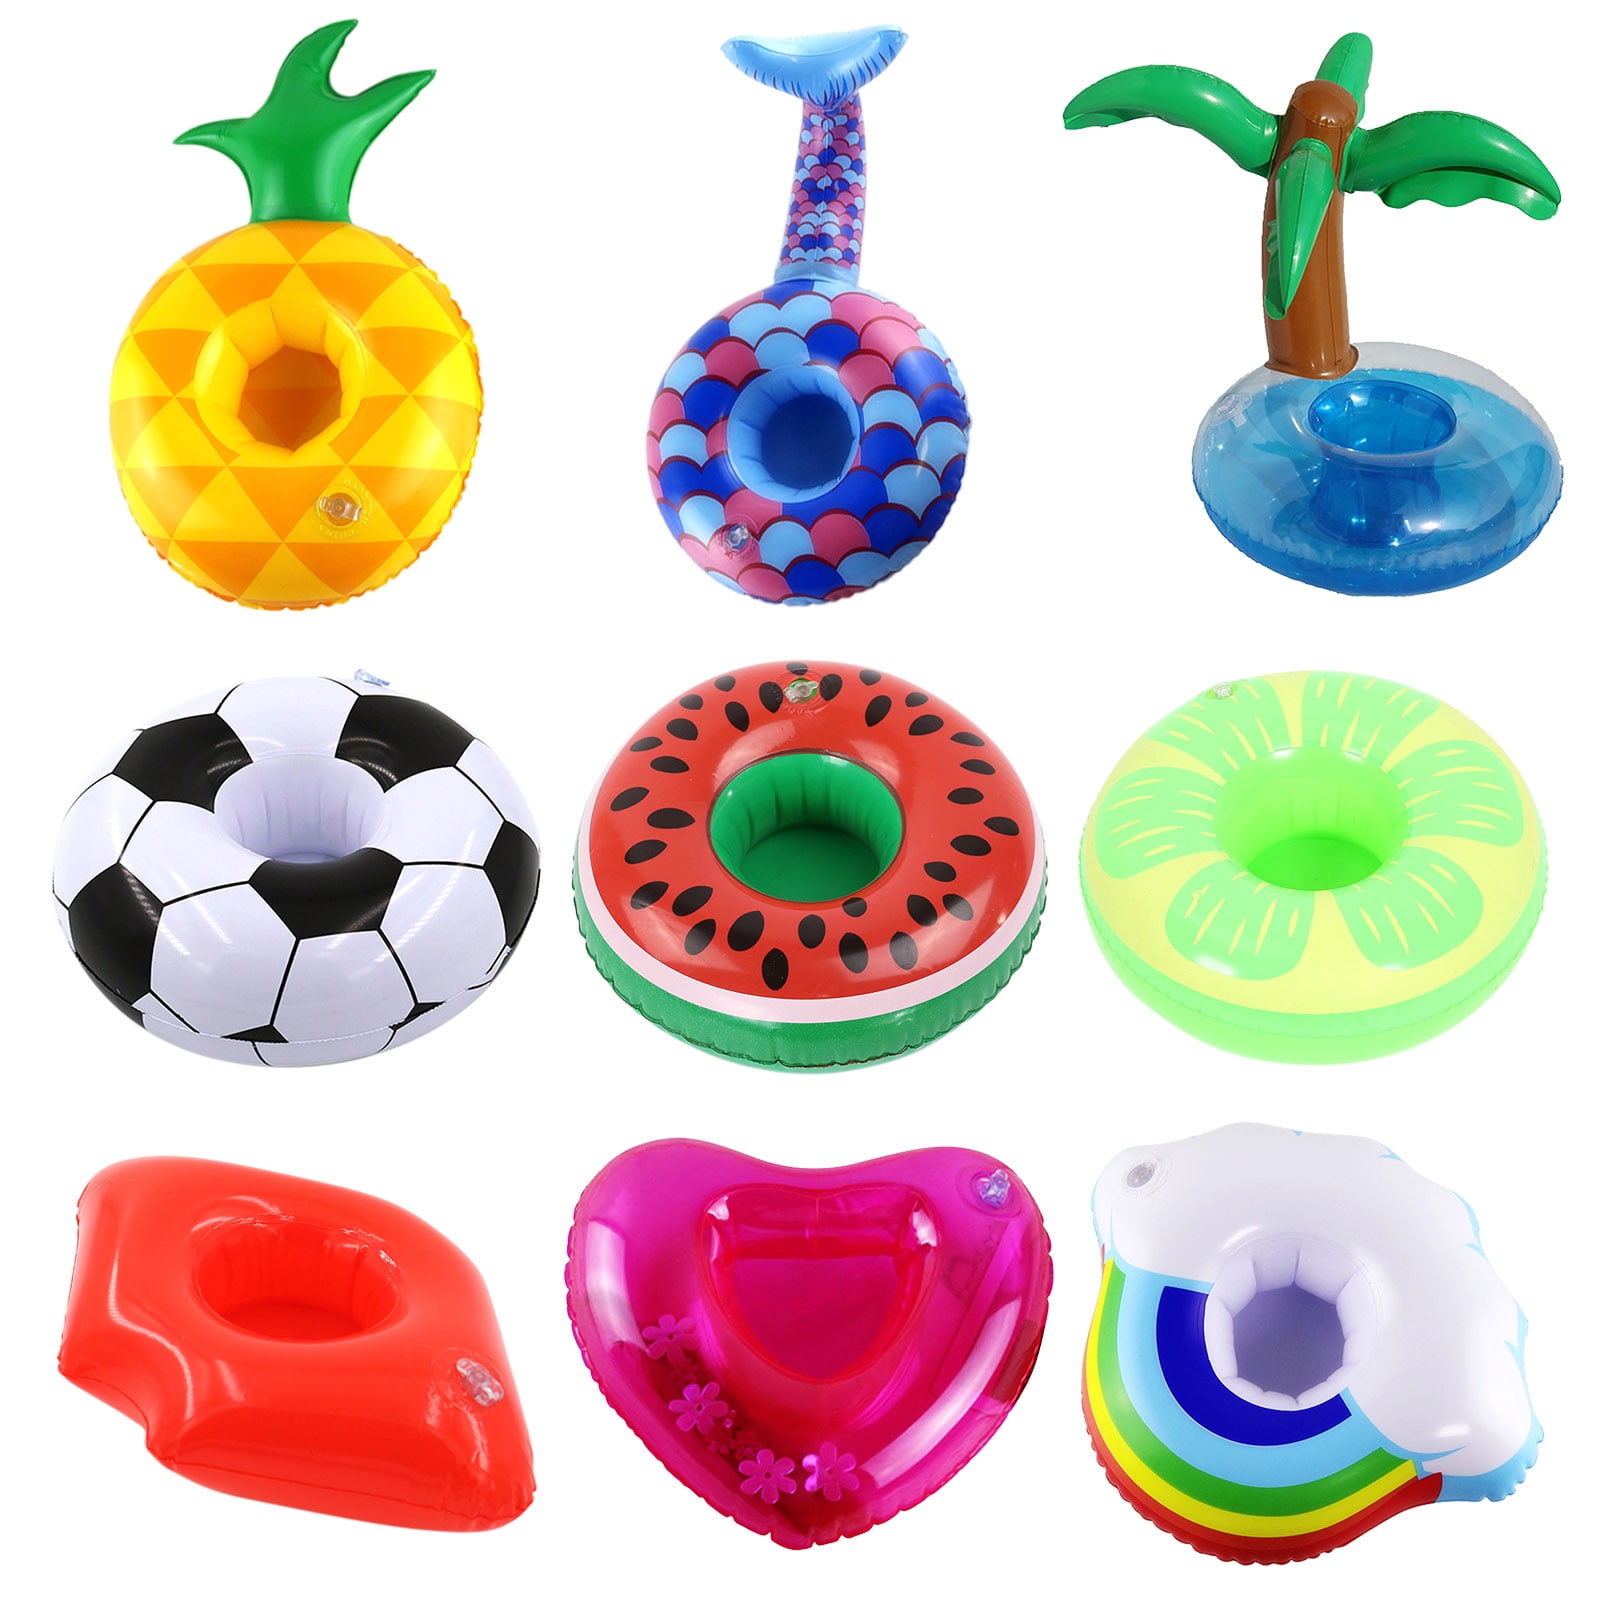 XIMISHOP 12pack Inflatable Drink Holder,Inflatable Cup Pool Drink Holder Floats Coasters for Summer Pool Party 